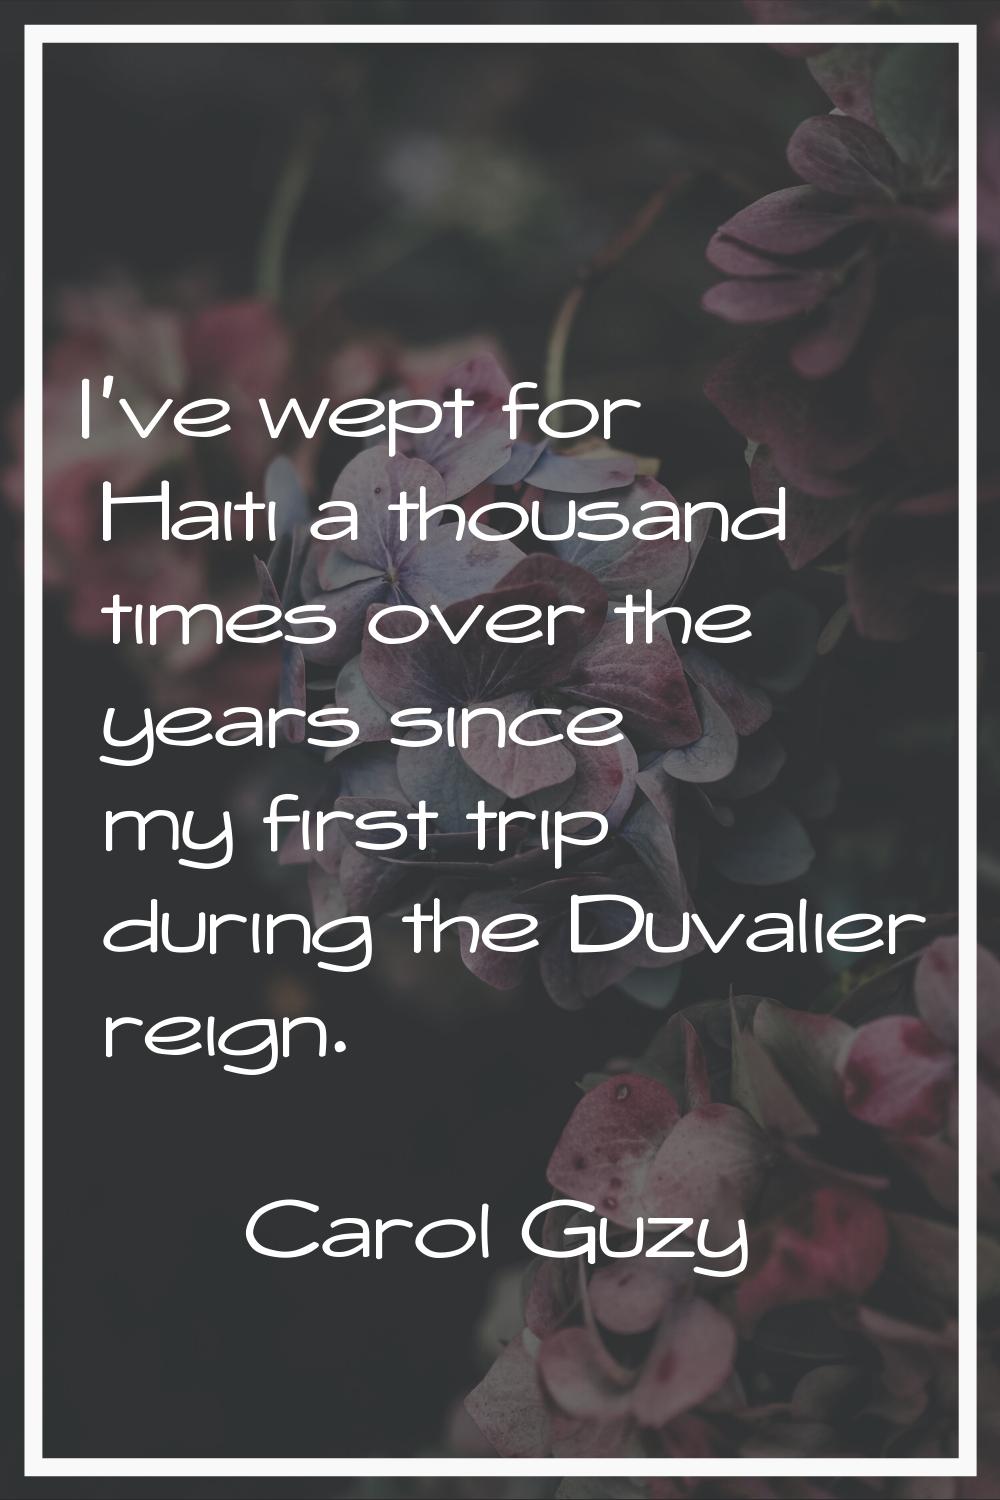 I've wept for Haiti a thousand times over the years since my first trip during the Duvalier reign.